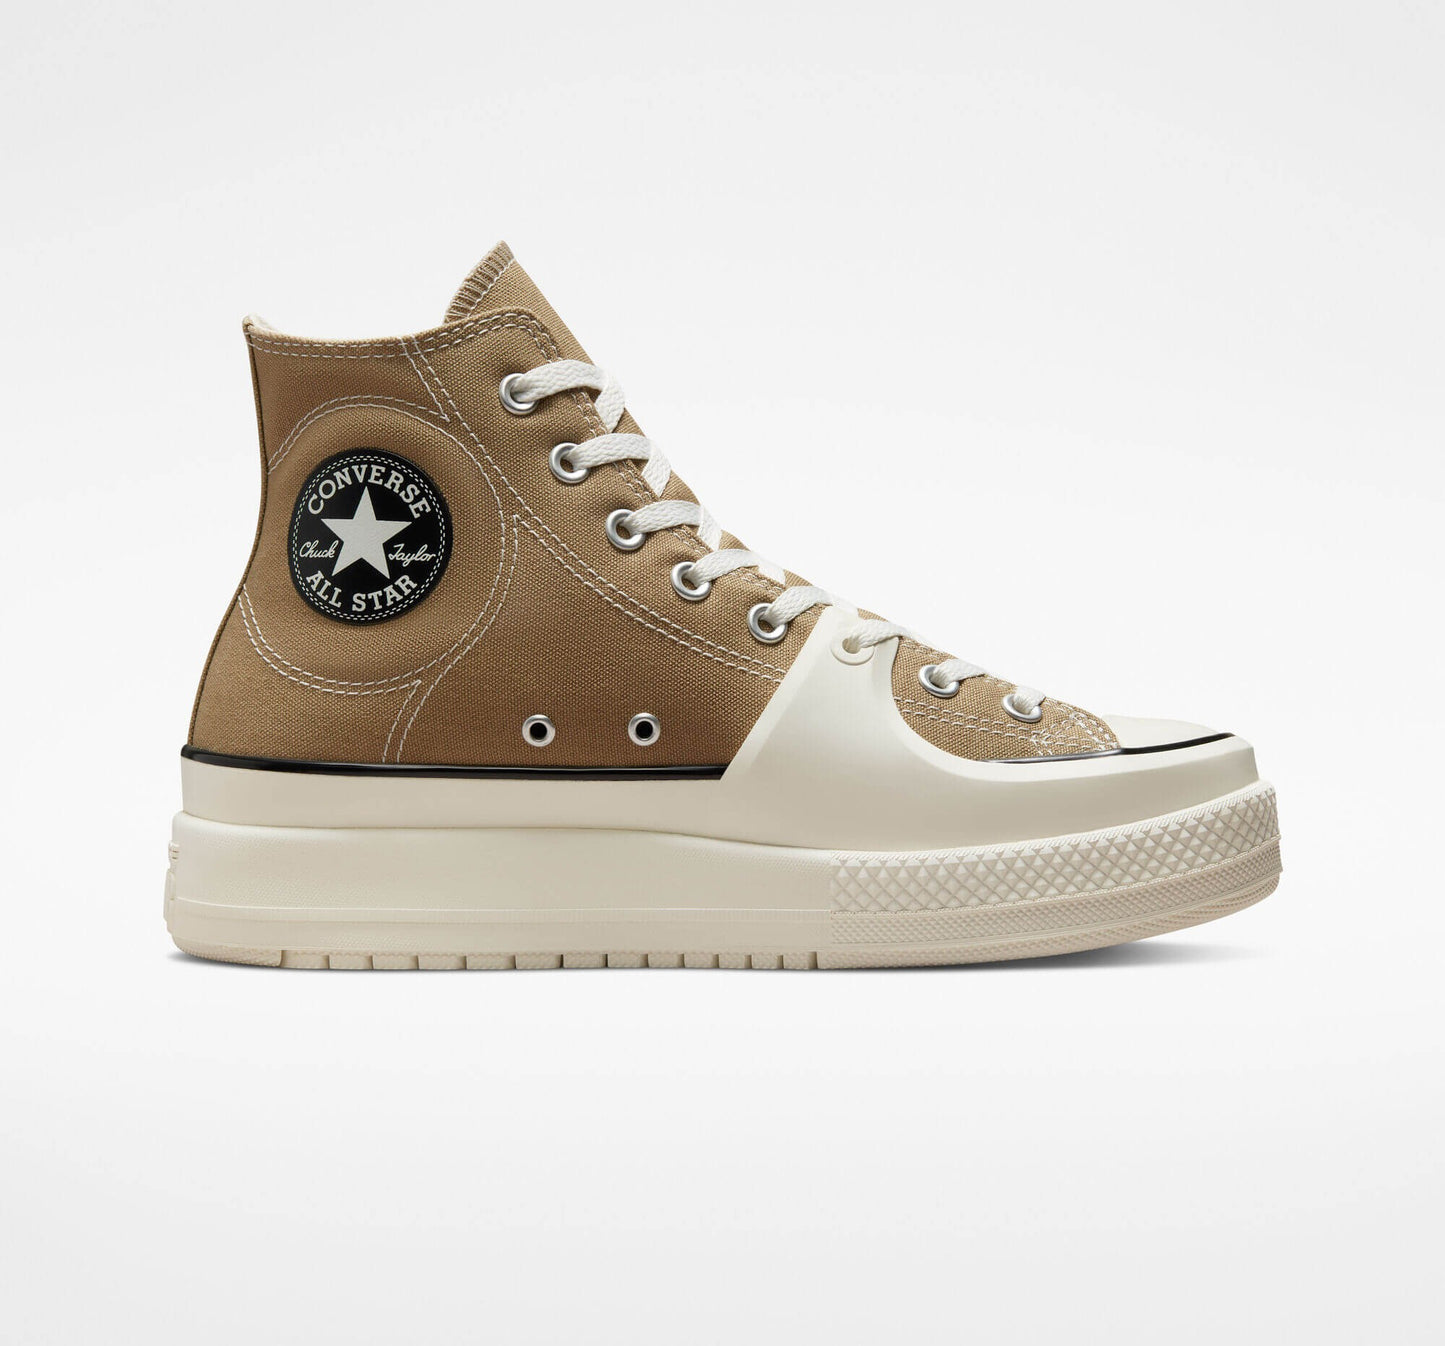 Converse Chuck Taylor All Star Construct Roasted/Black/Egret